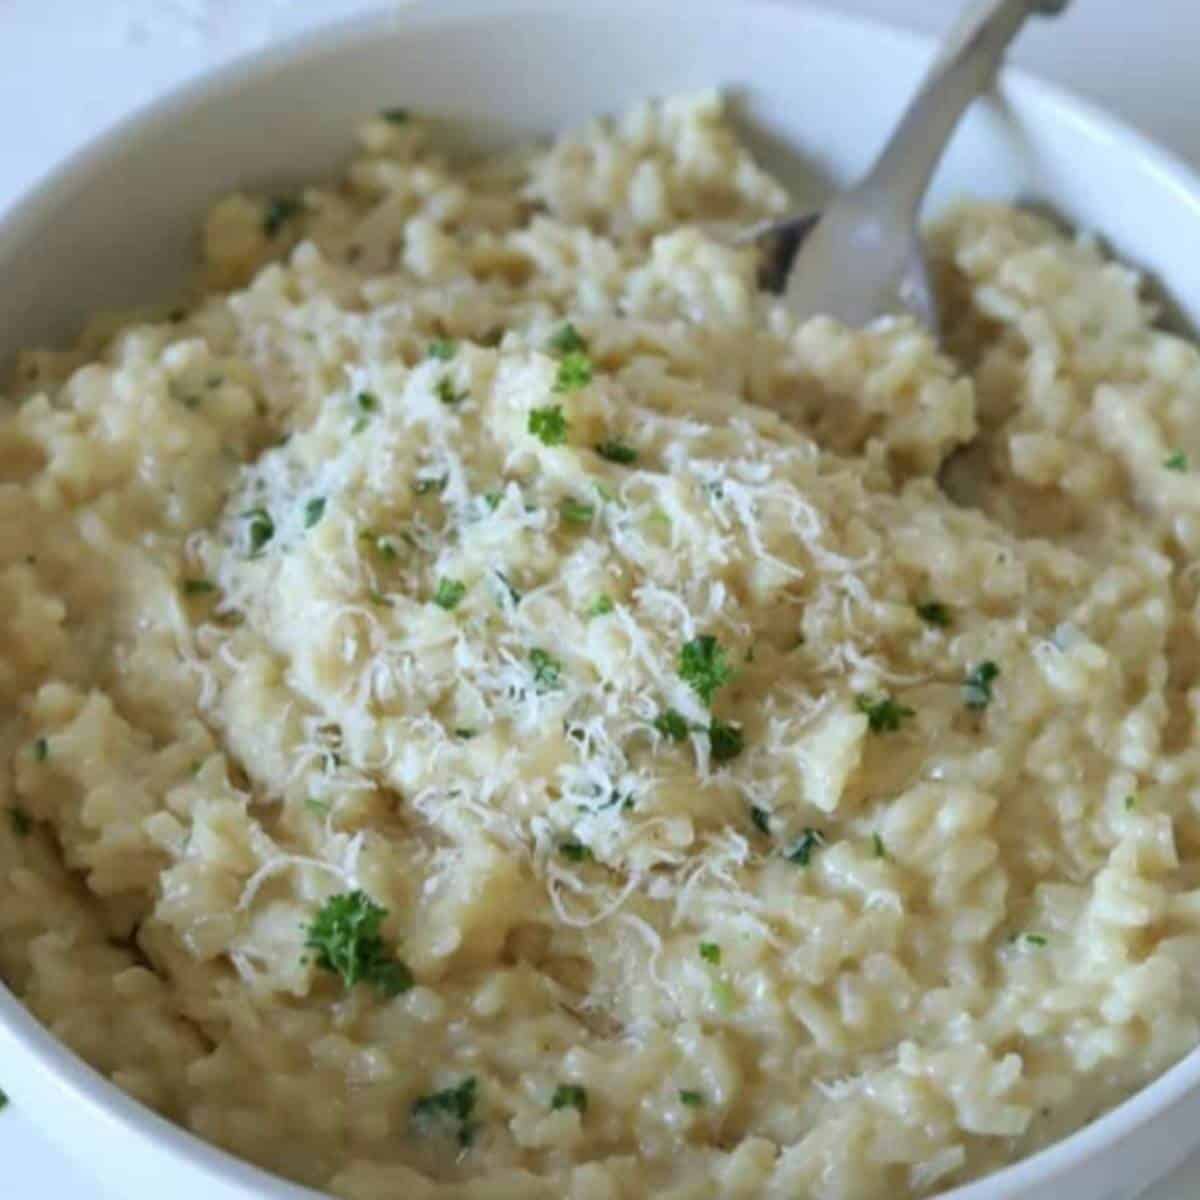 Creamy garlic parmesan risotto topped with parsley in serving dish.